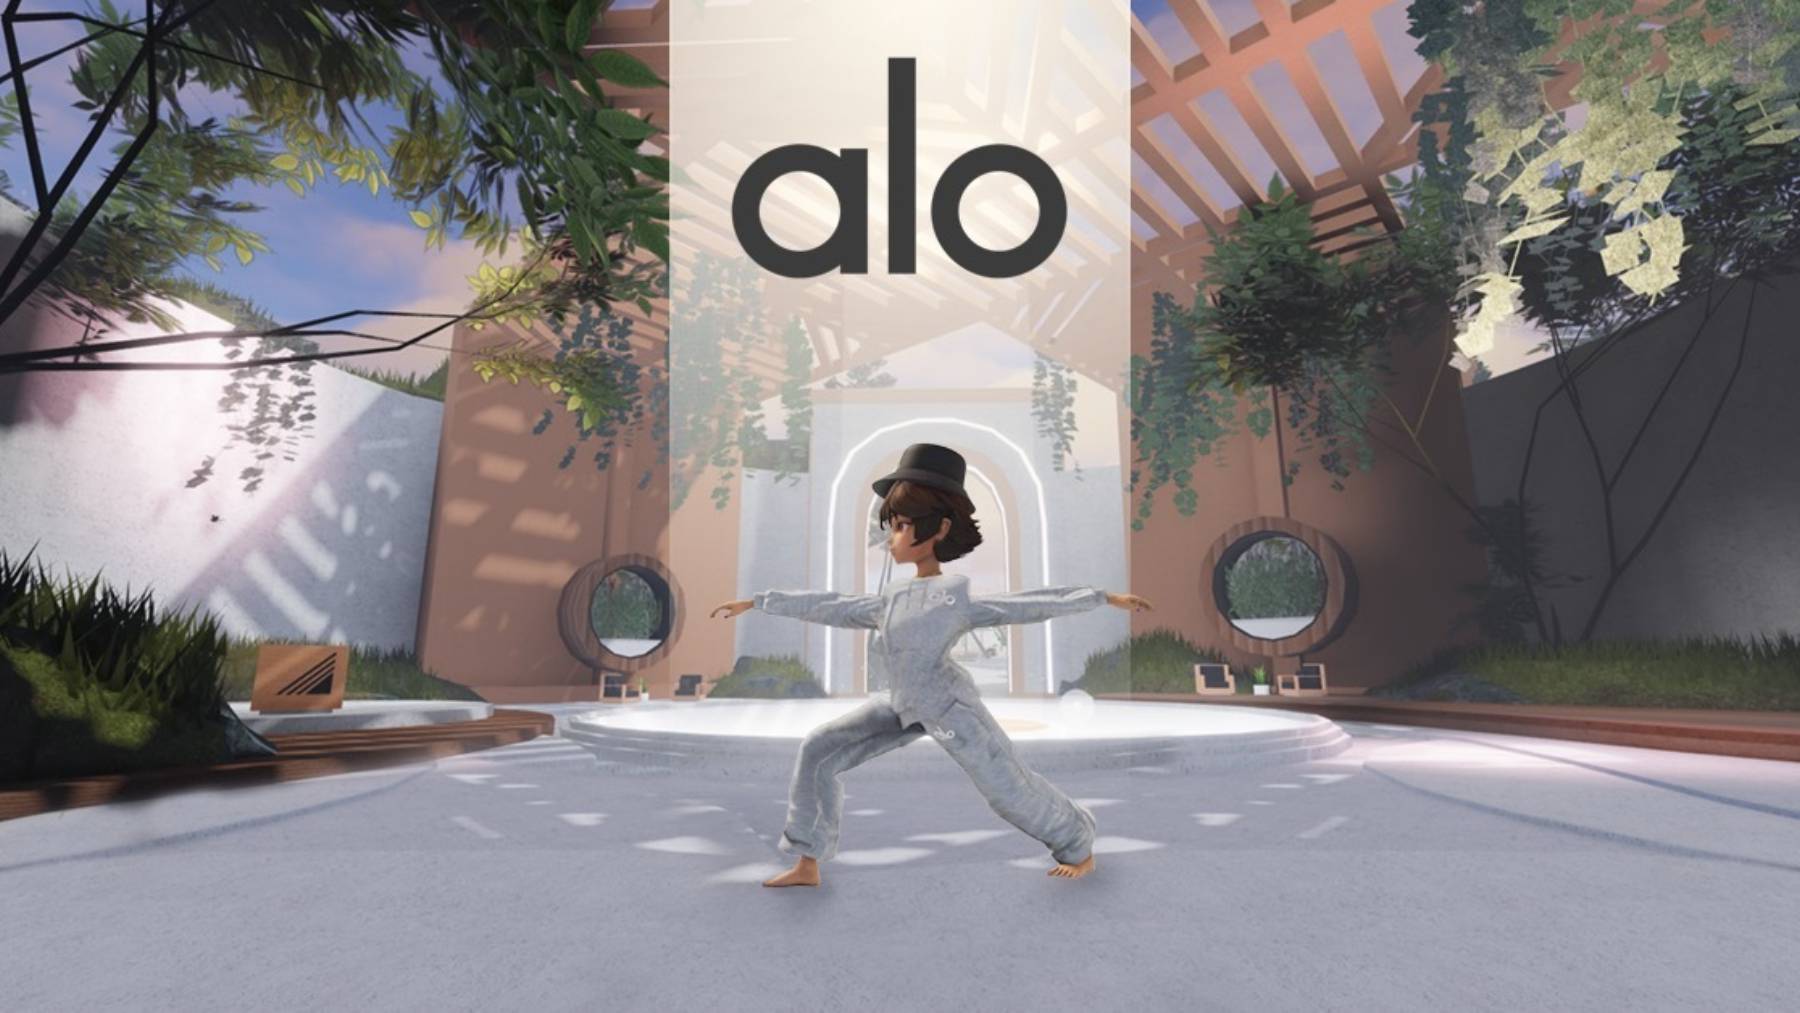 A Roblox avatar stands in warrior pose in a serene space filled with greenery where the Alo logo floats in a beam of light in the background.